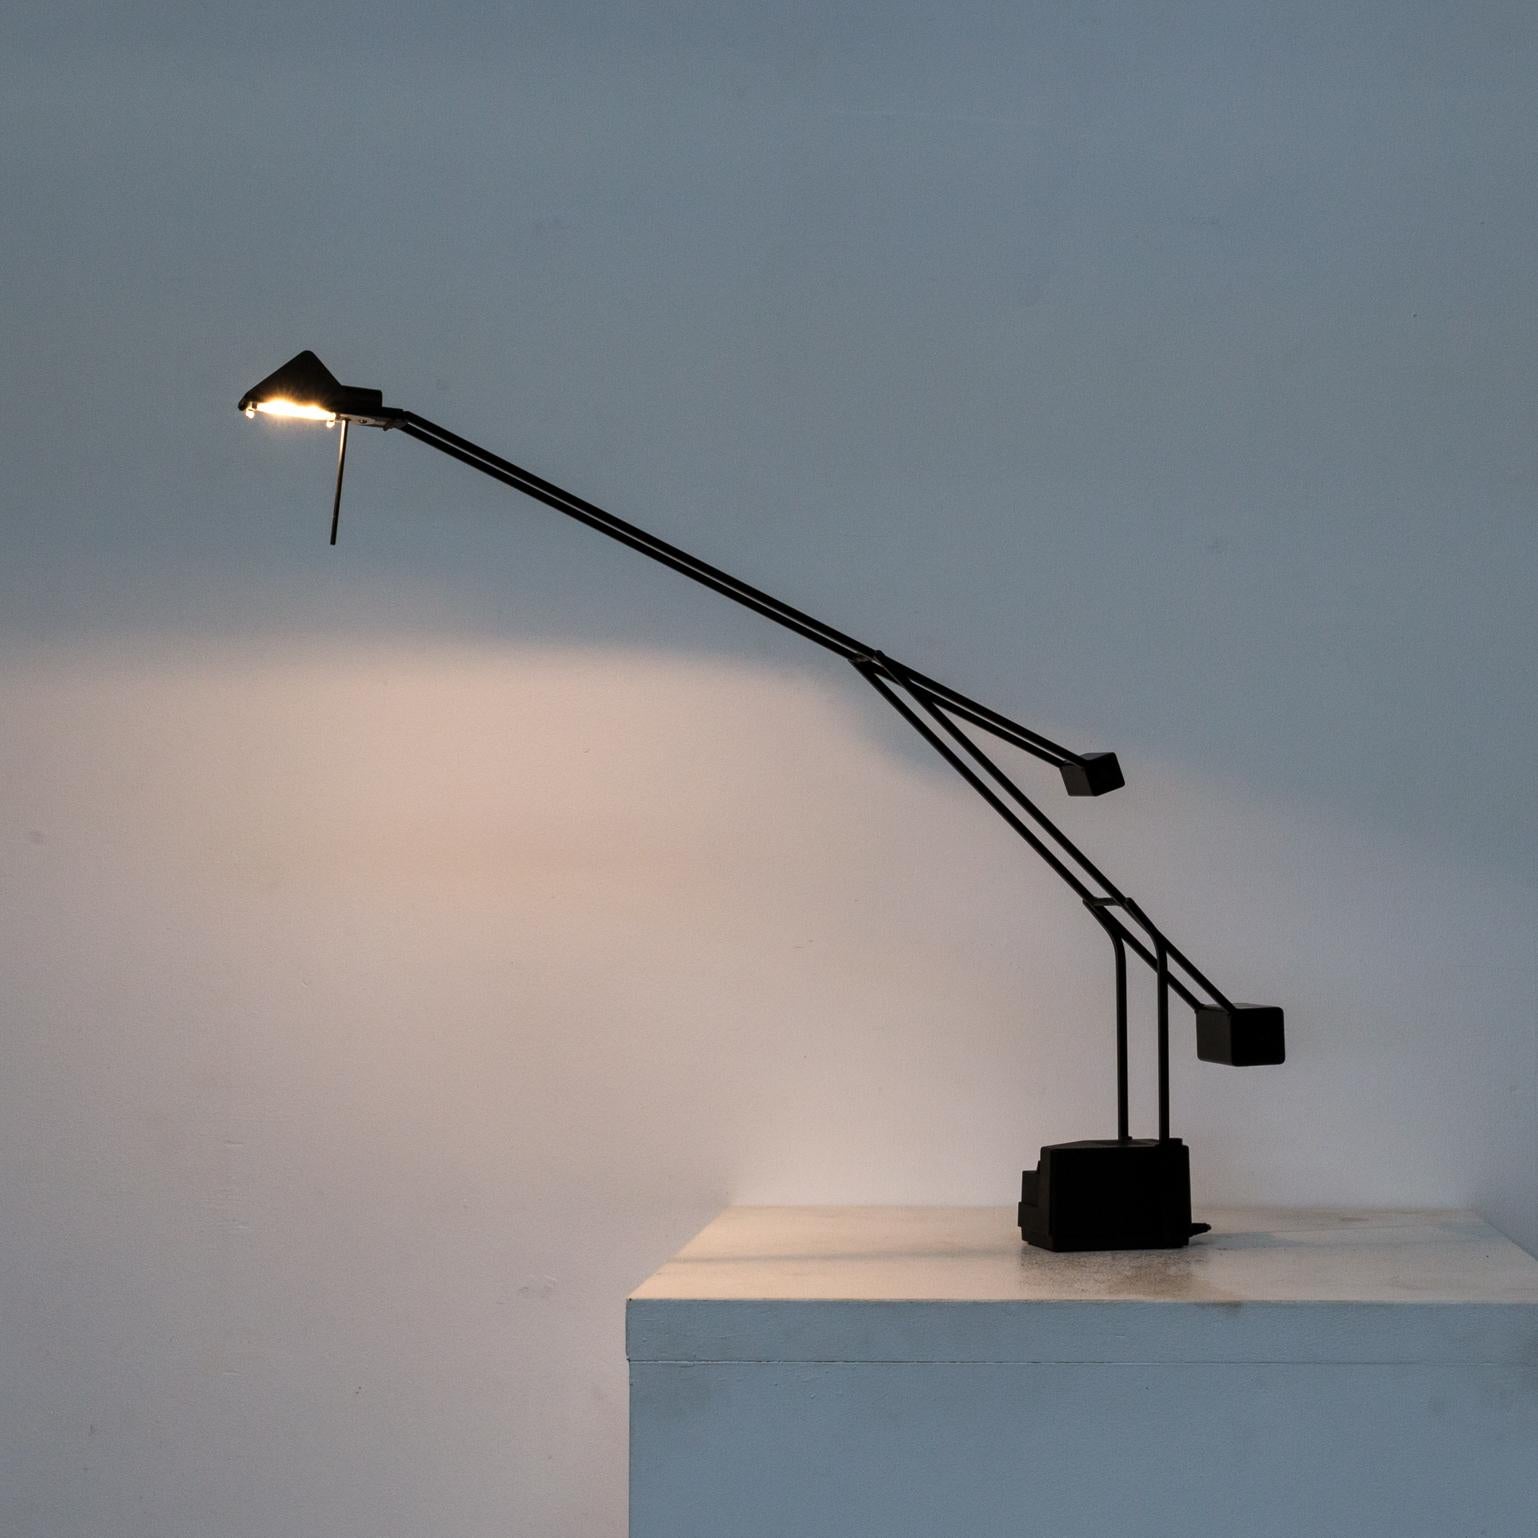 1980s halogen counter balance desk lamp for Fase. Good and working condition consistent with age and use.